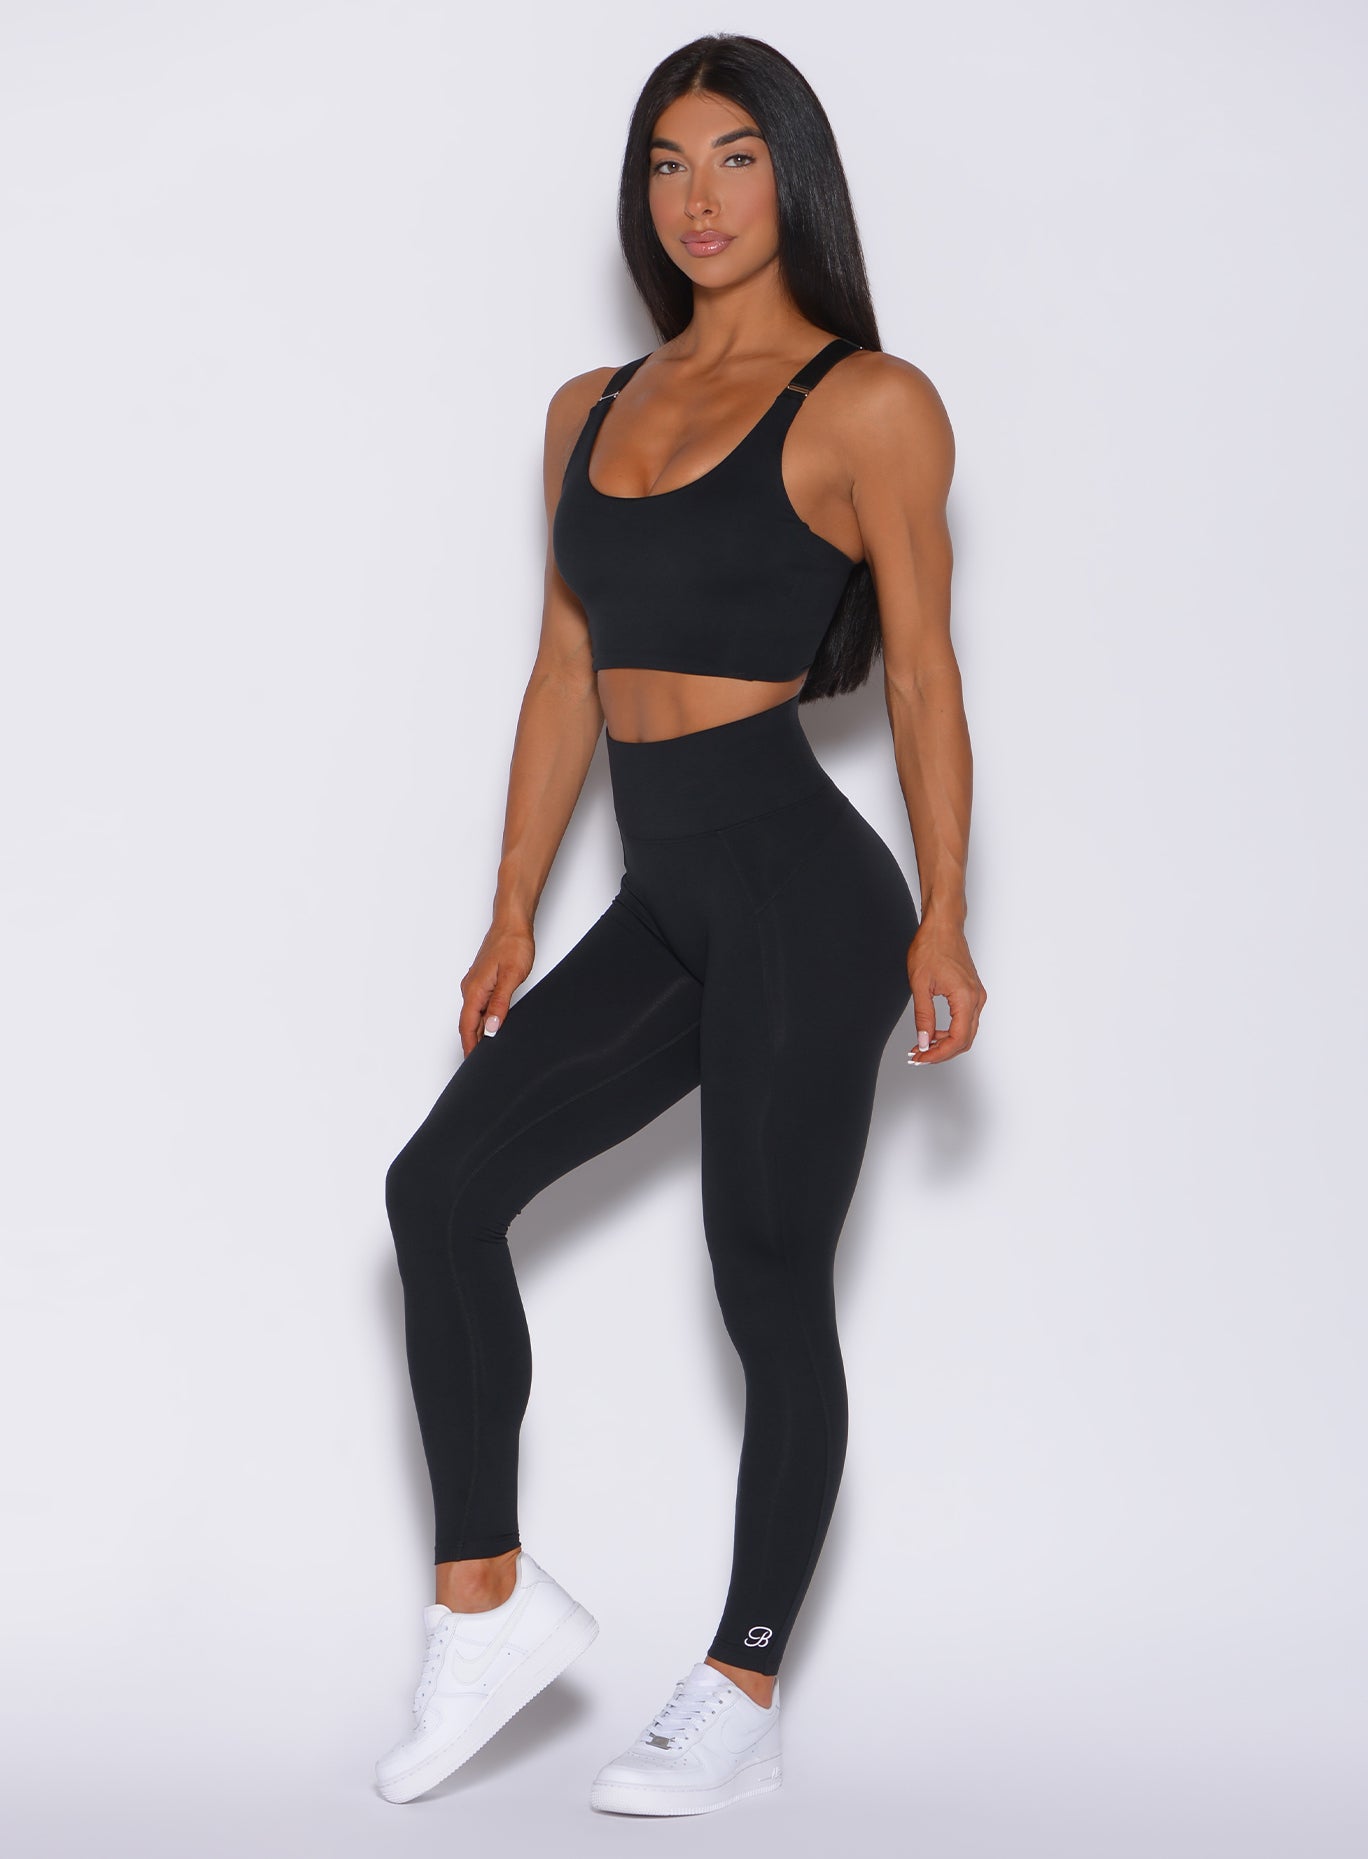 Left side profile view of a model in our black snatched waist leggings and a matching bra